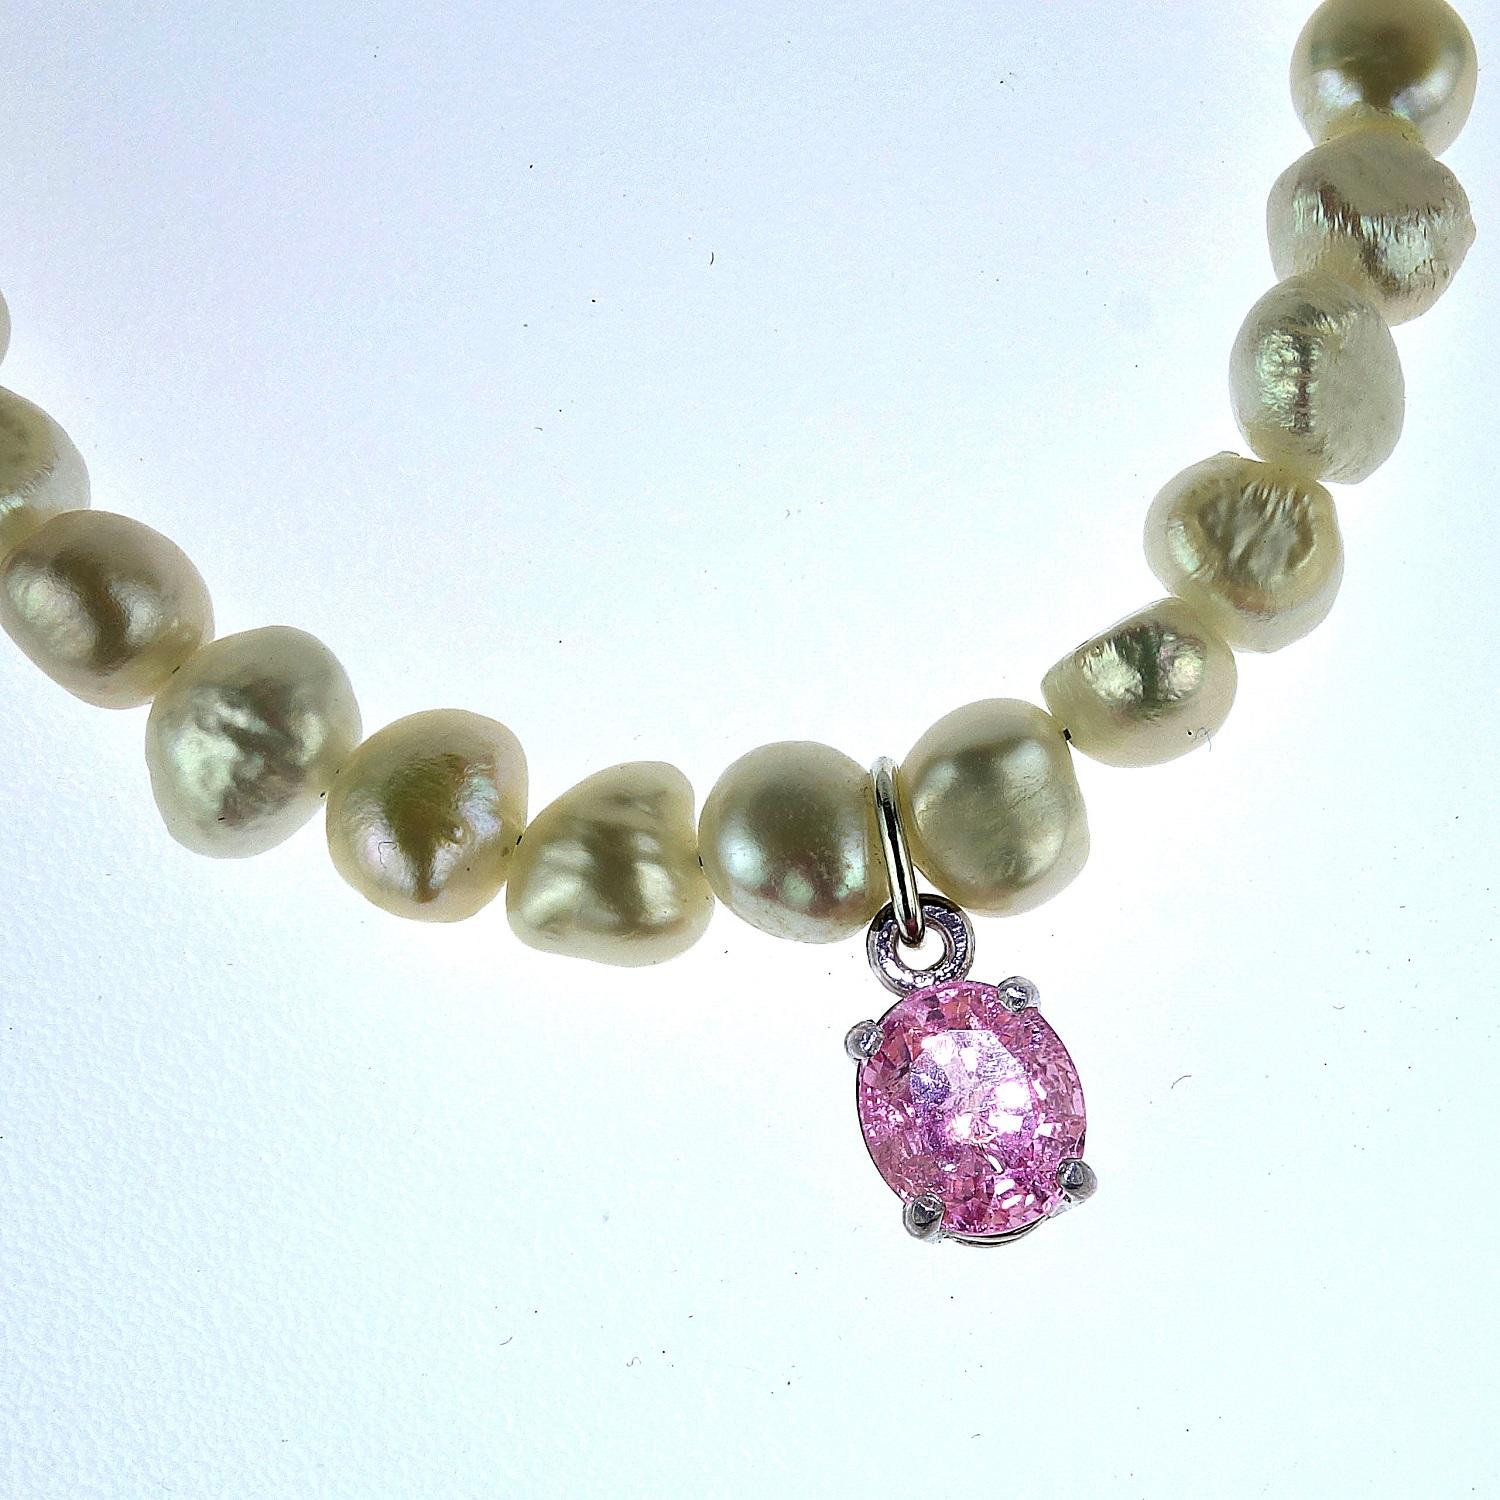 Artisan AJD White Pearl Choker Necklace with Pink Spinel